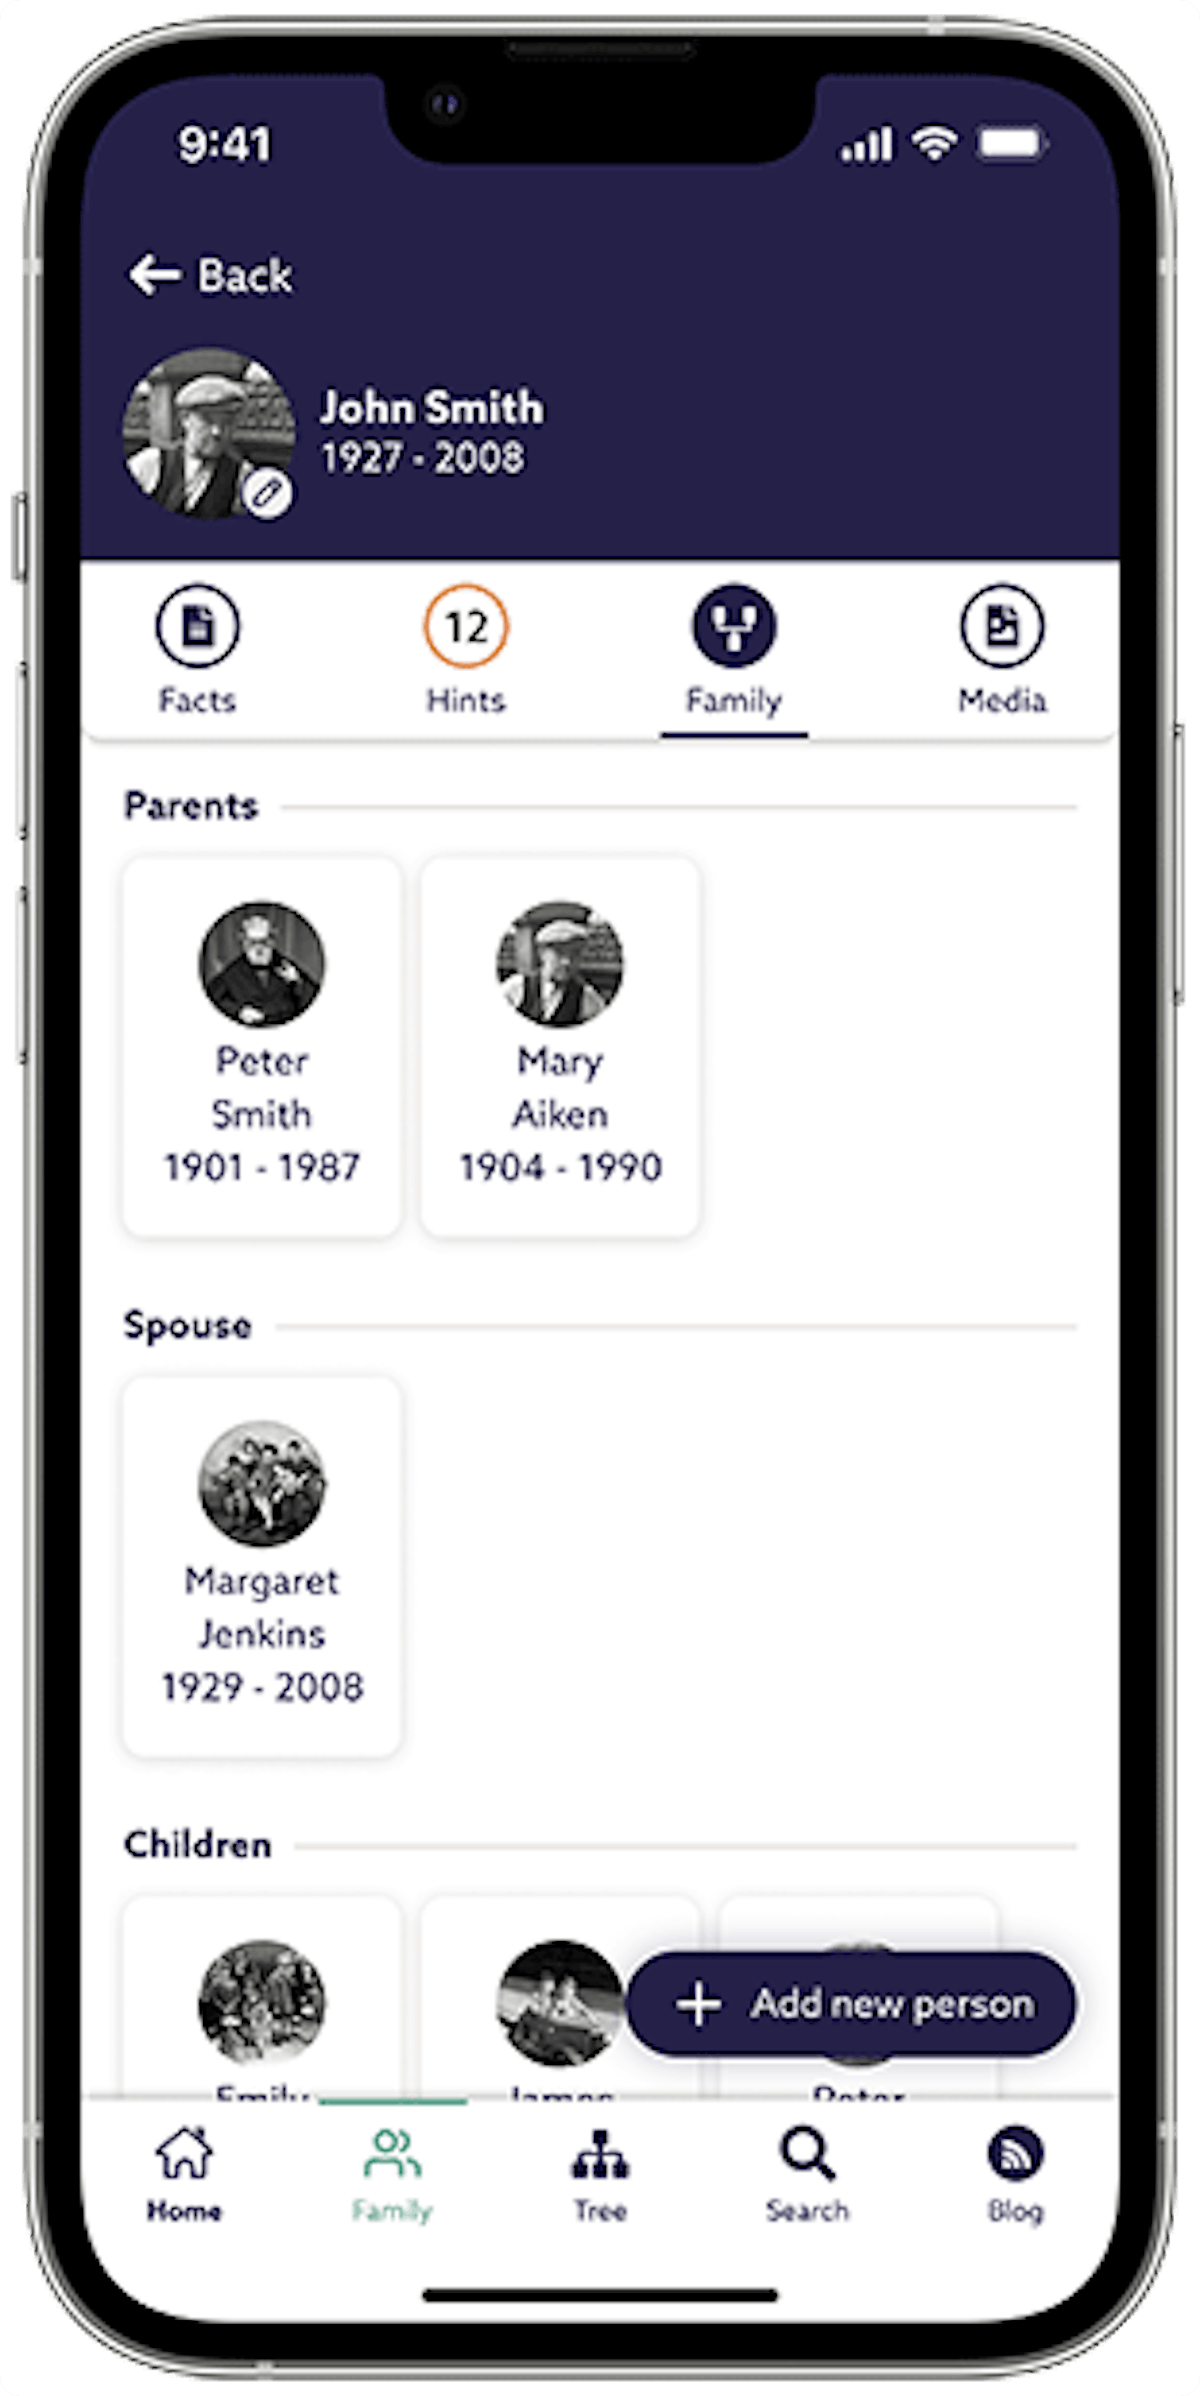 Family tab in the Findmypast app